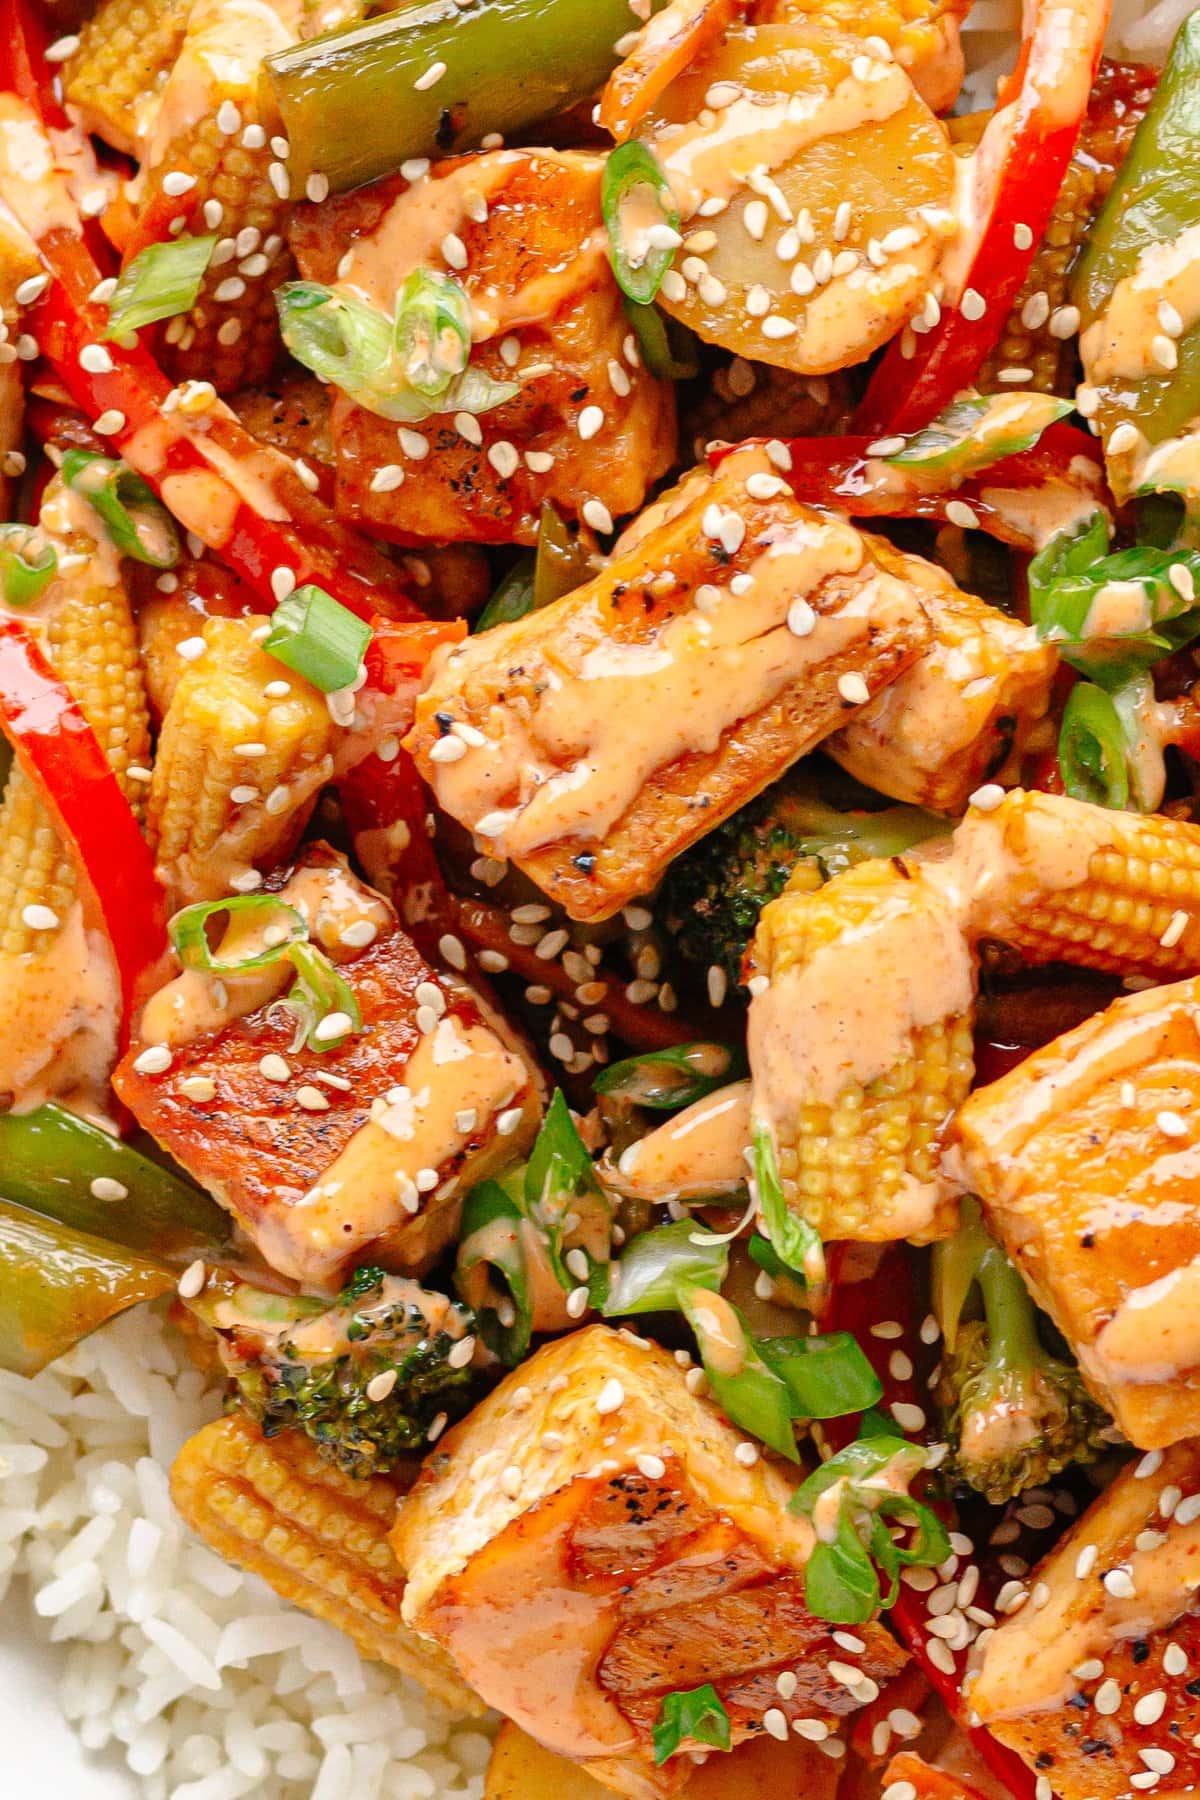 Closeup of salmon stir fry garnished with sesame seeds, chopped green onions and sriracha mayo drizzle.